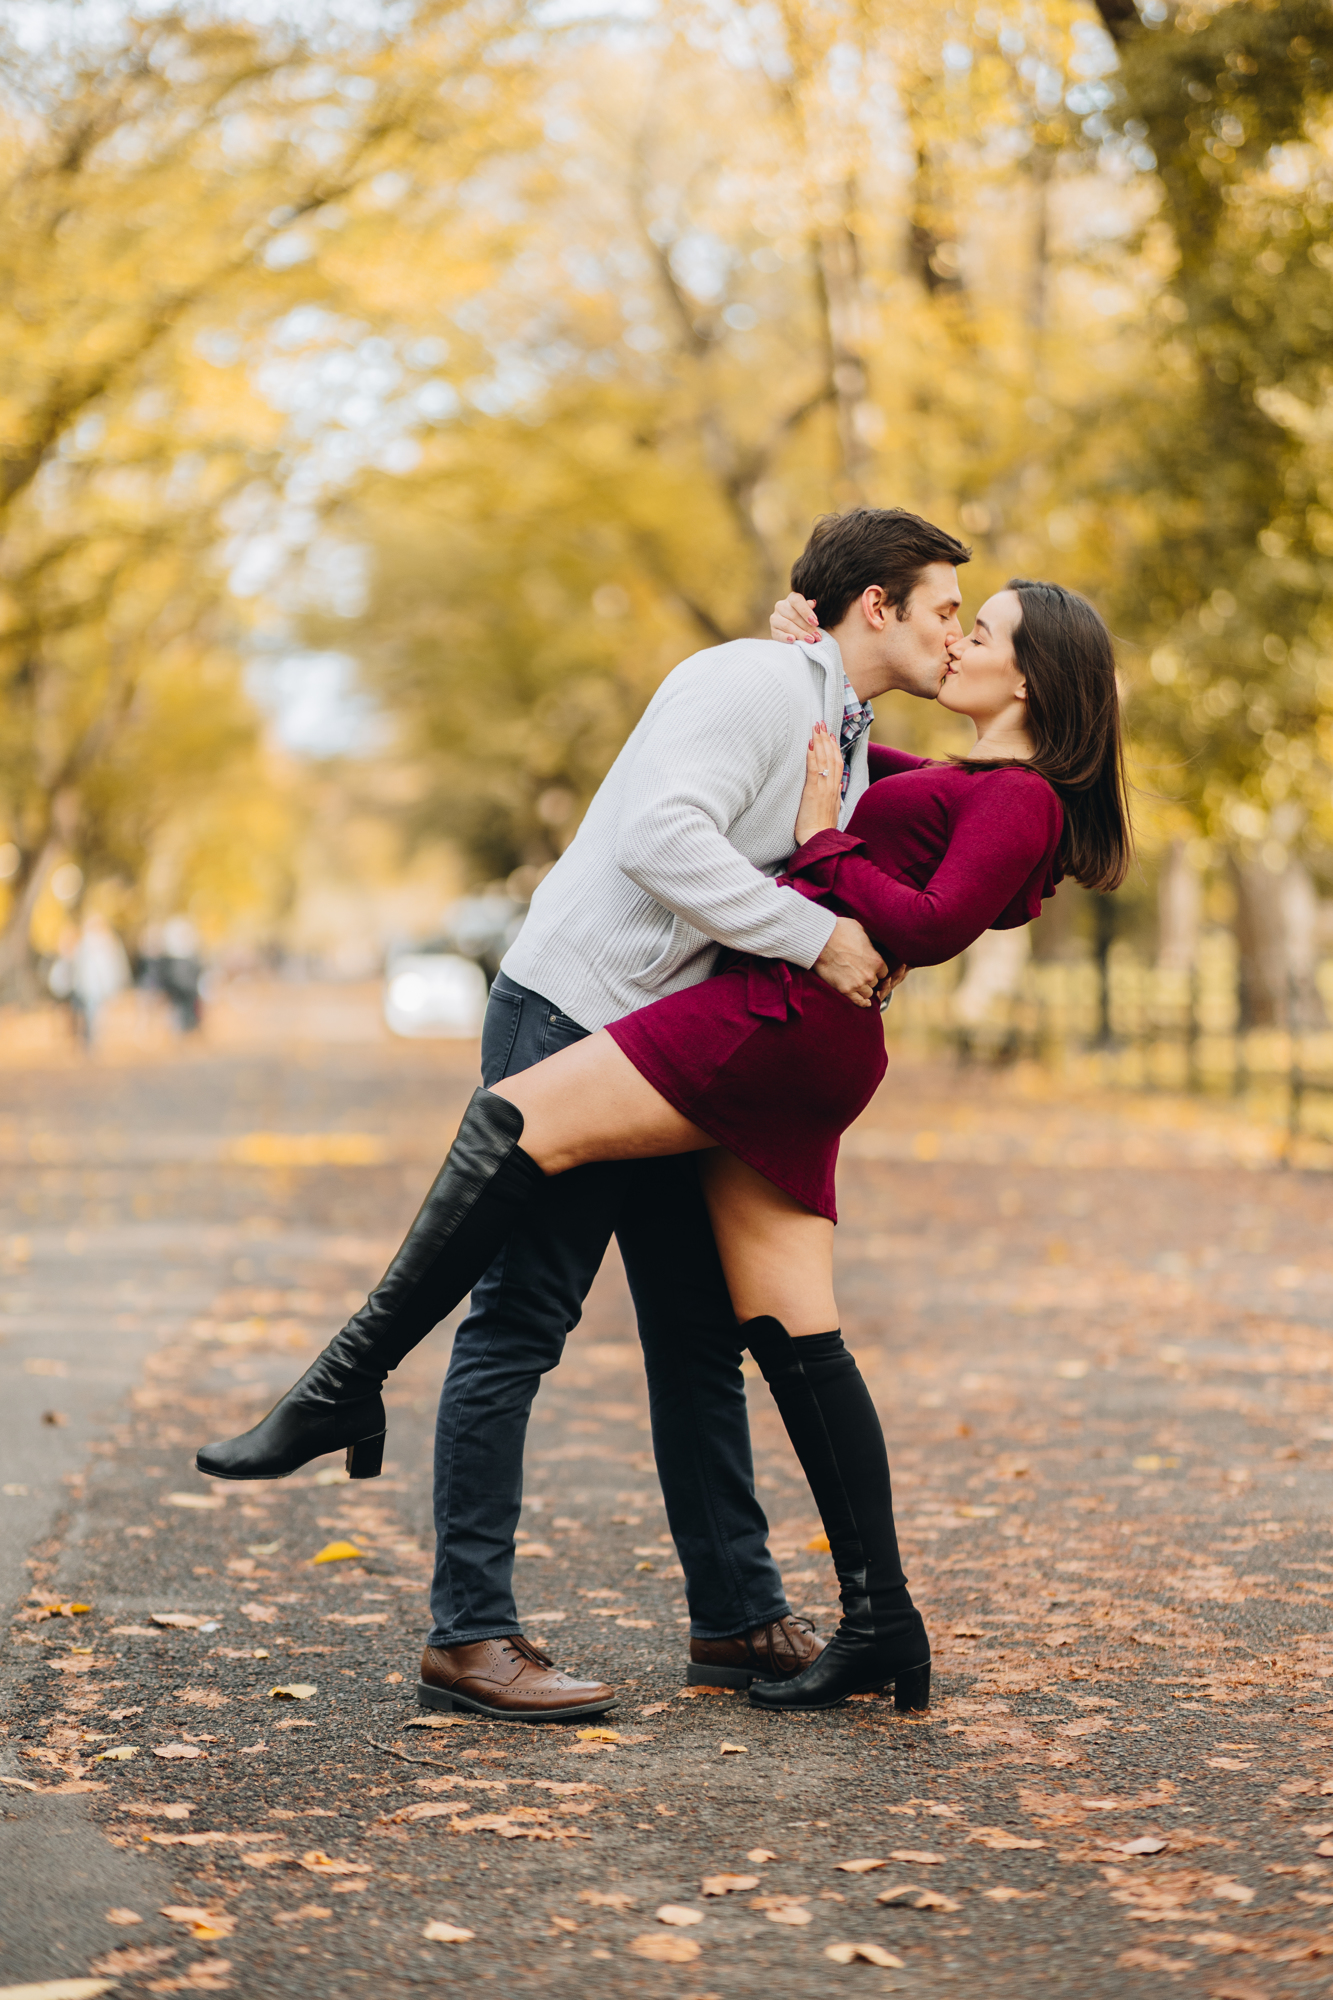 Stunning Fall Engagement Photos in Central Park New York